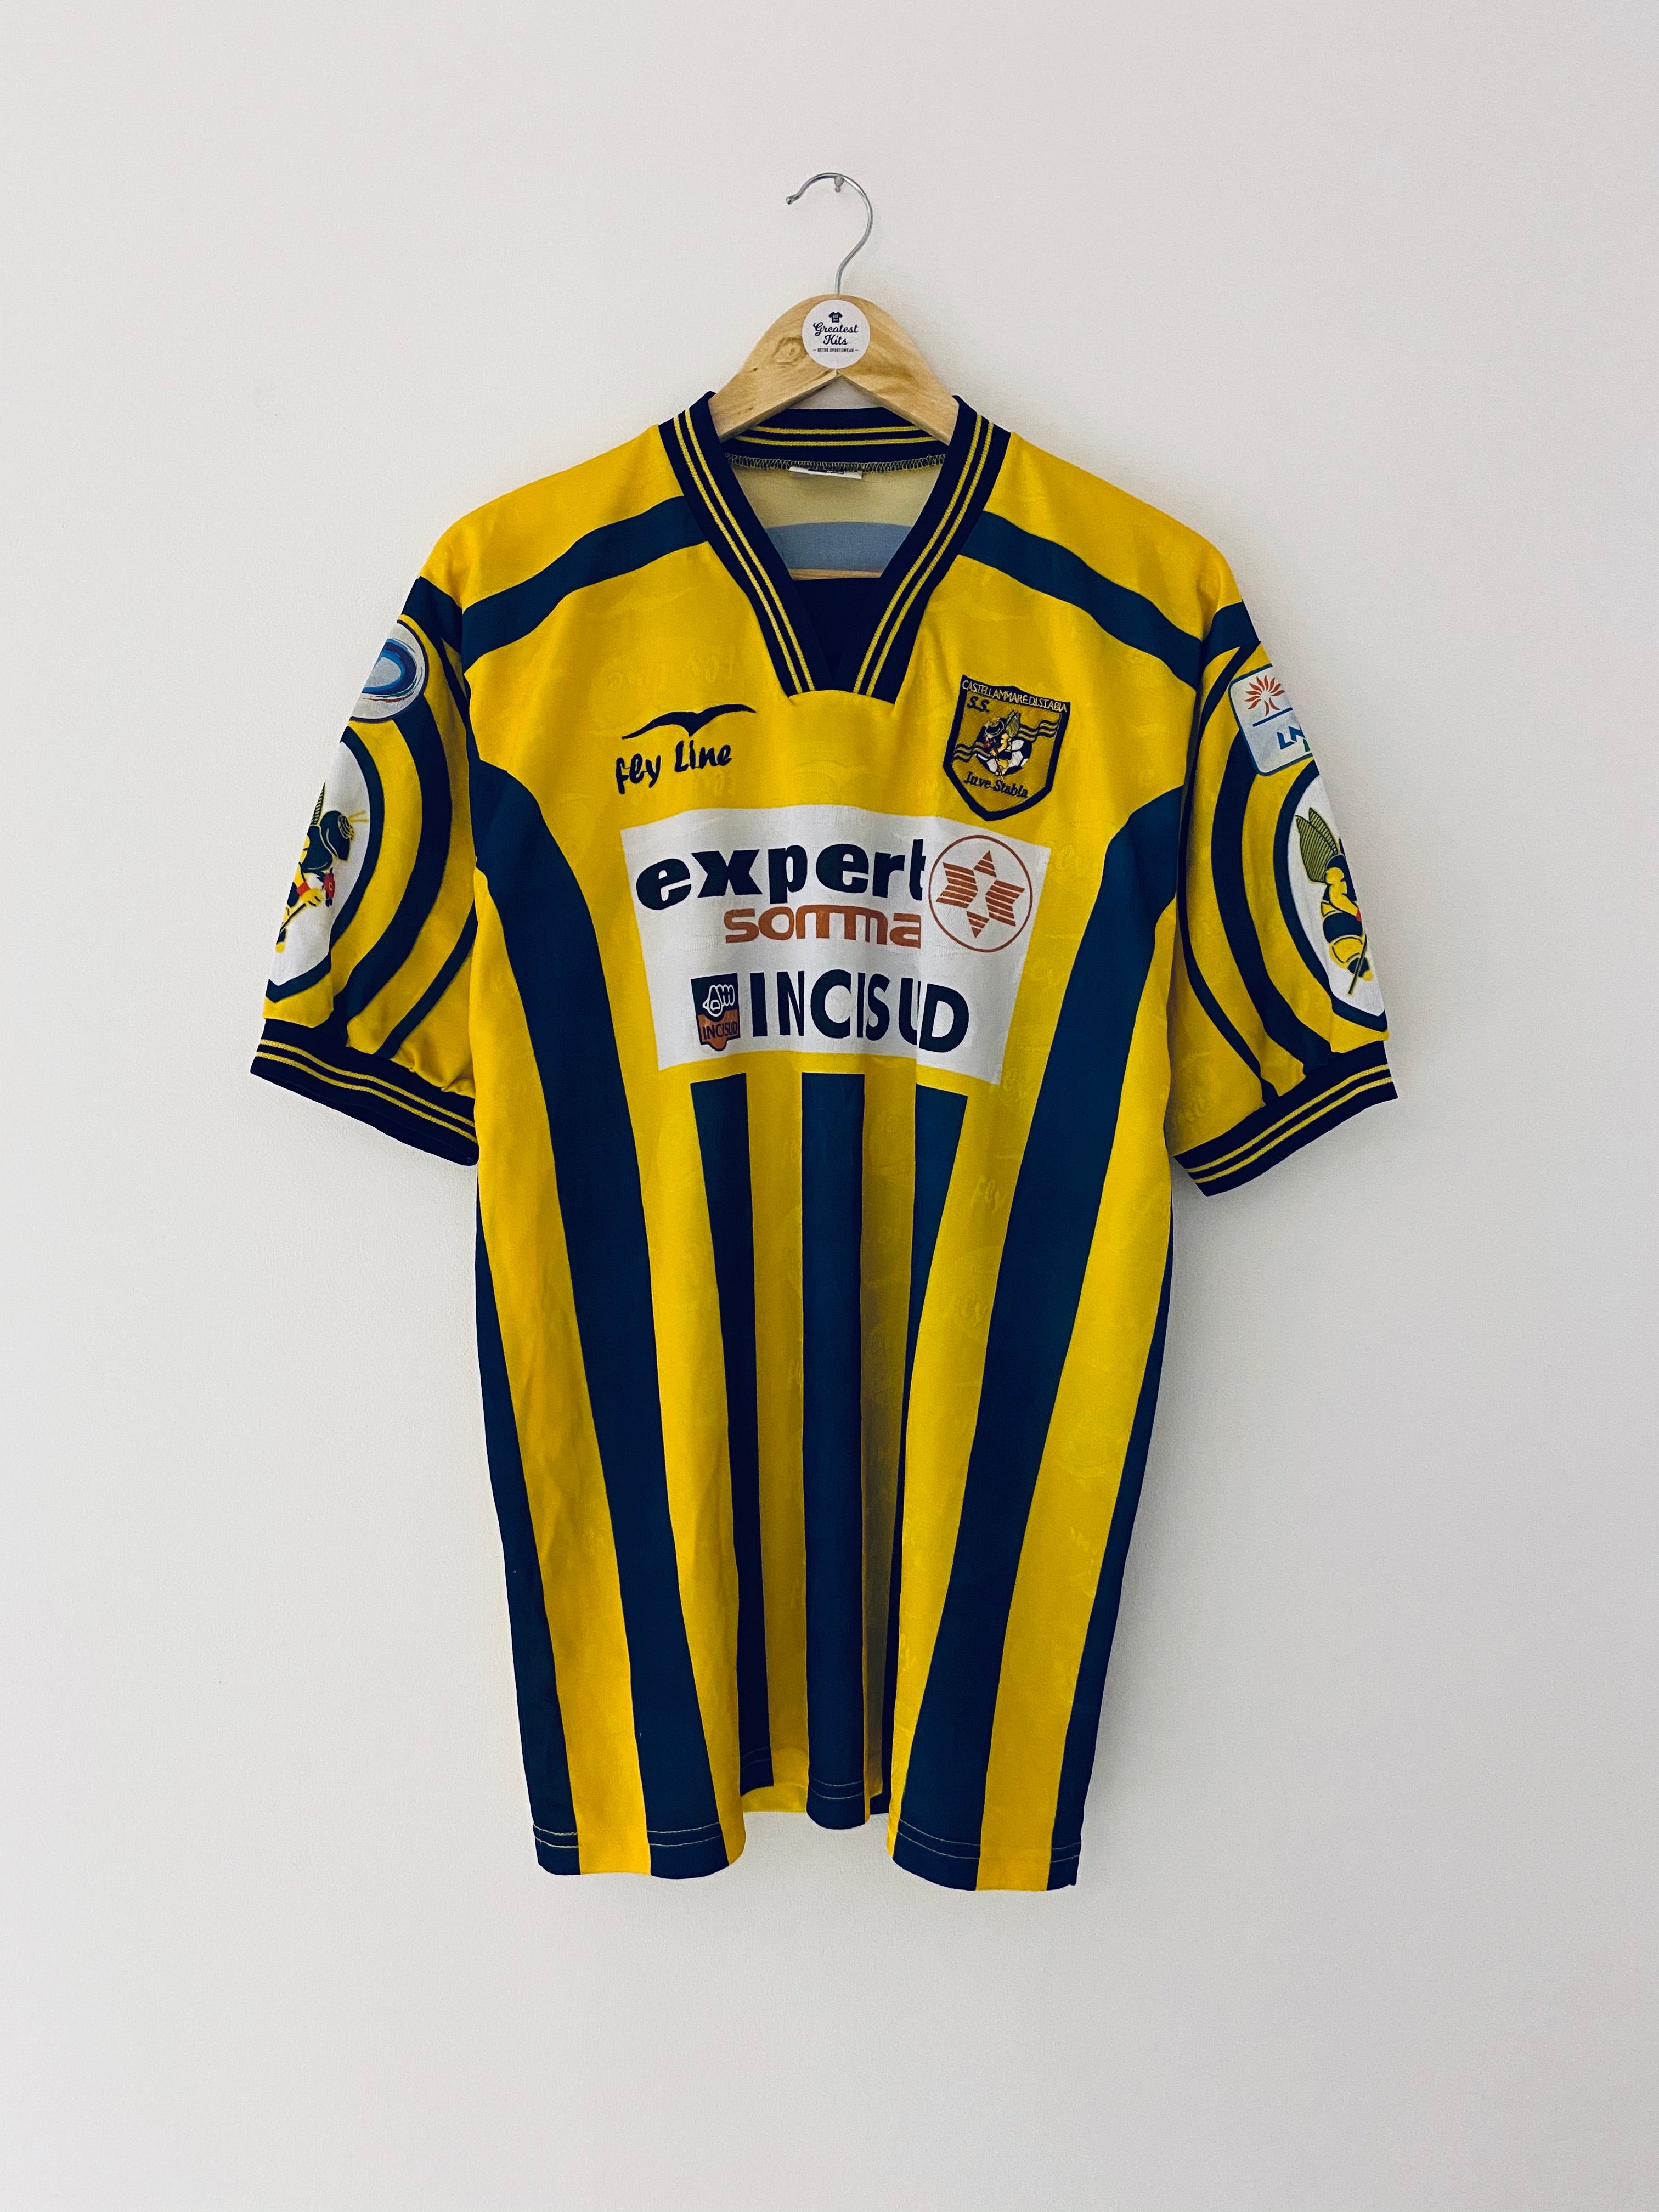 2003/04 Juve Stabia *Match Issue* Maillot domicile #6 (XL) 9/10